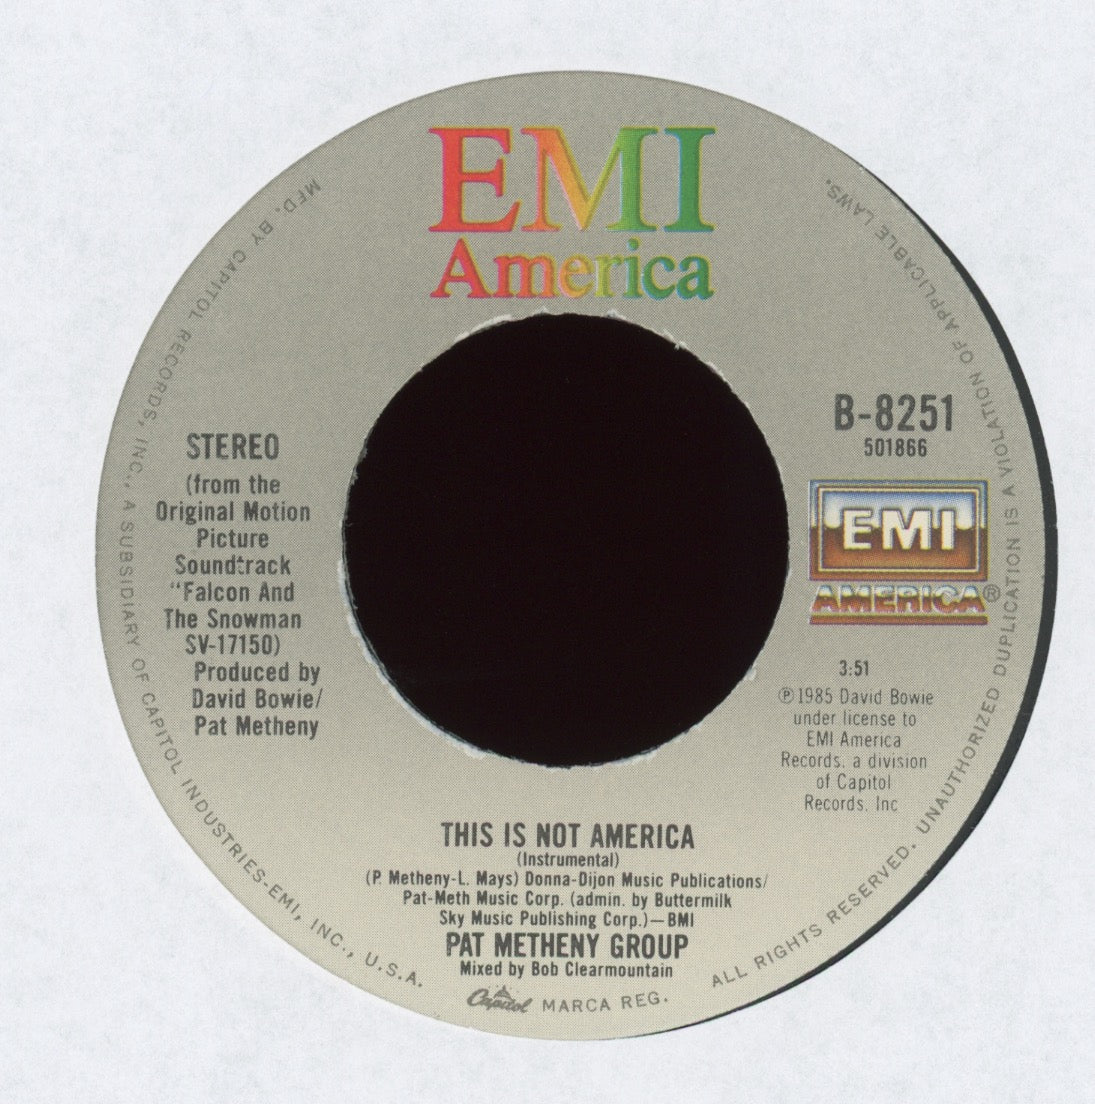 David Bowie - This Is Not America on EMI America